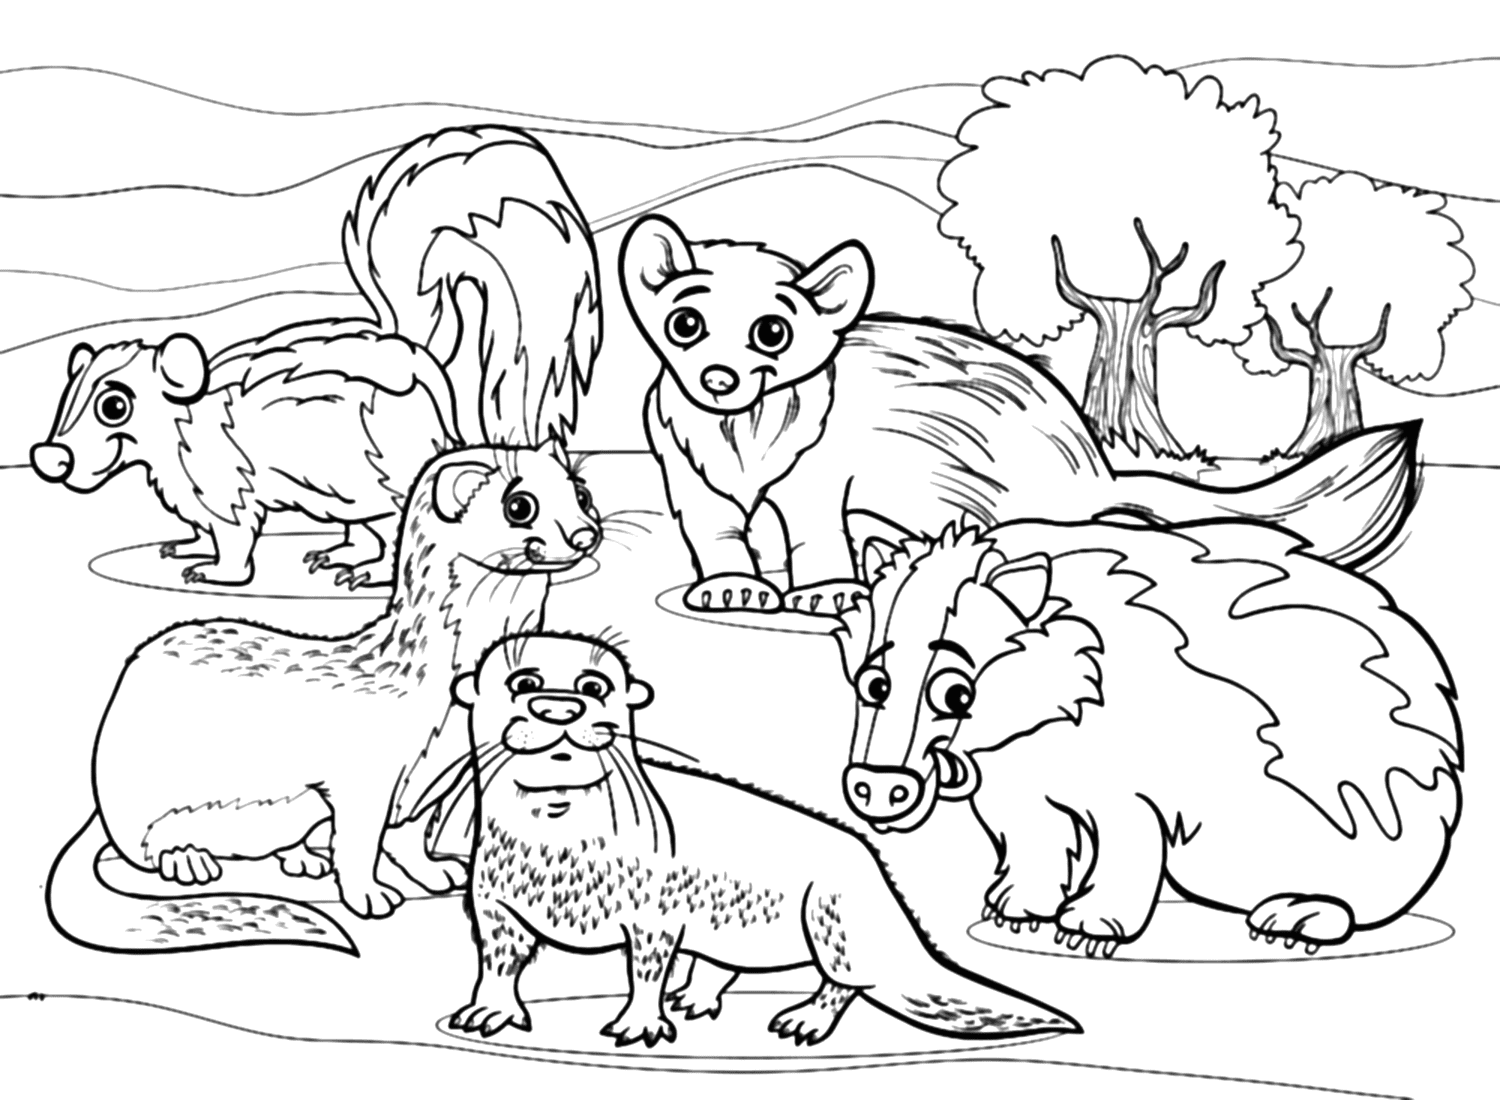 Badger Coloring Page from Badger